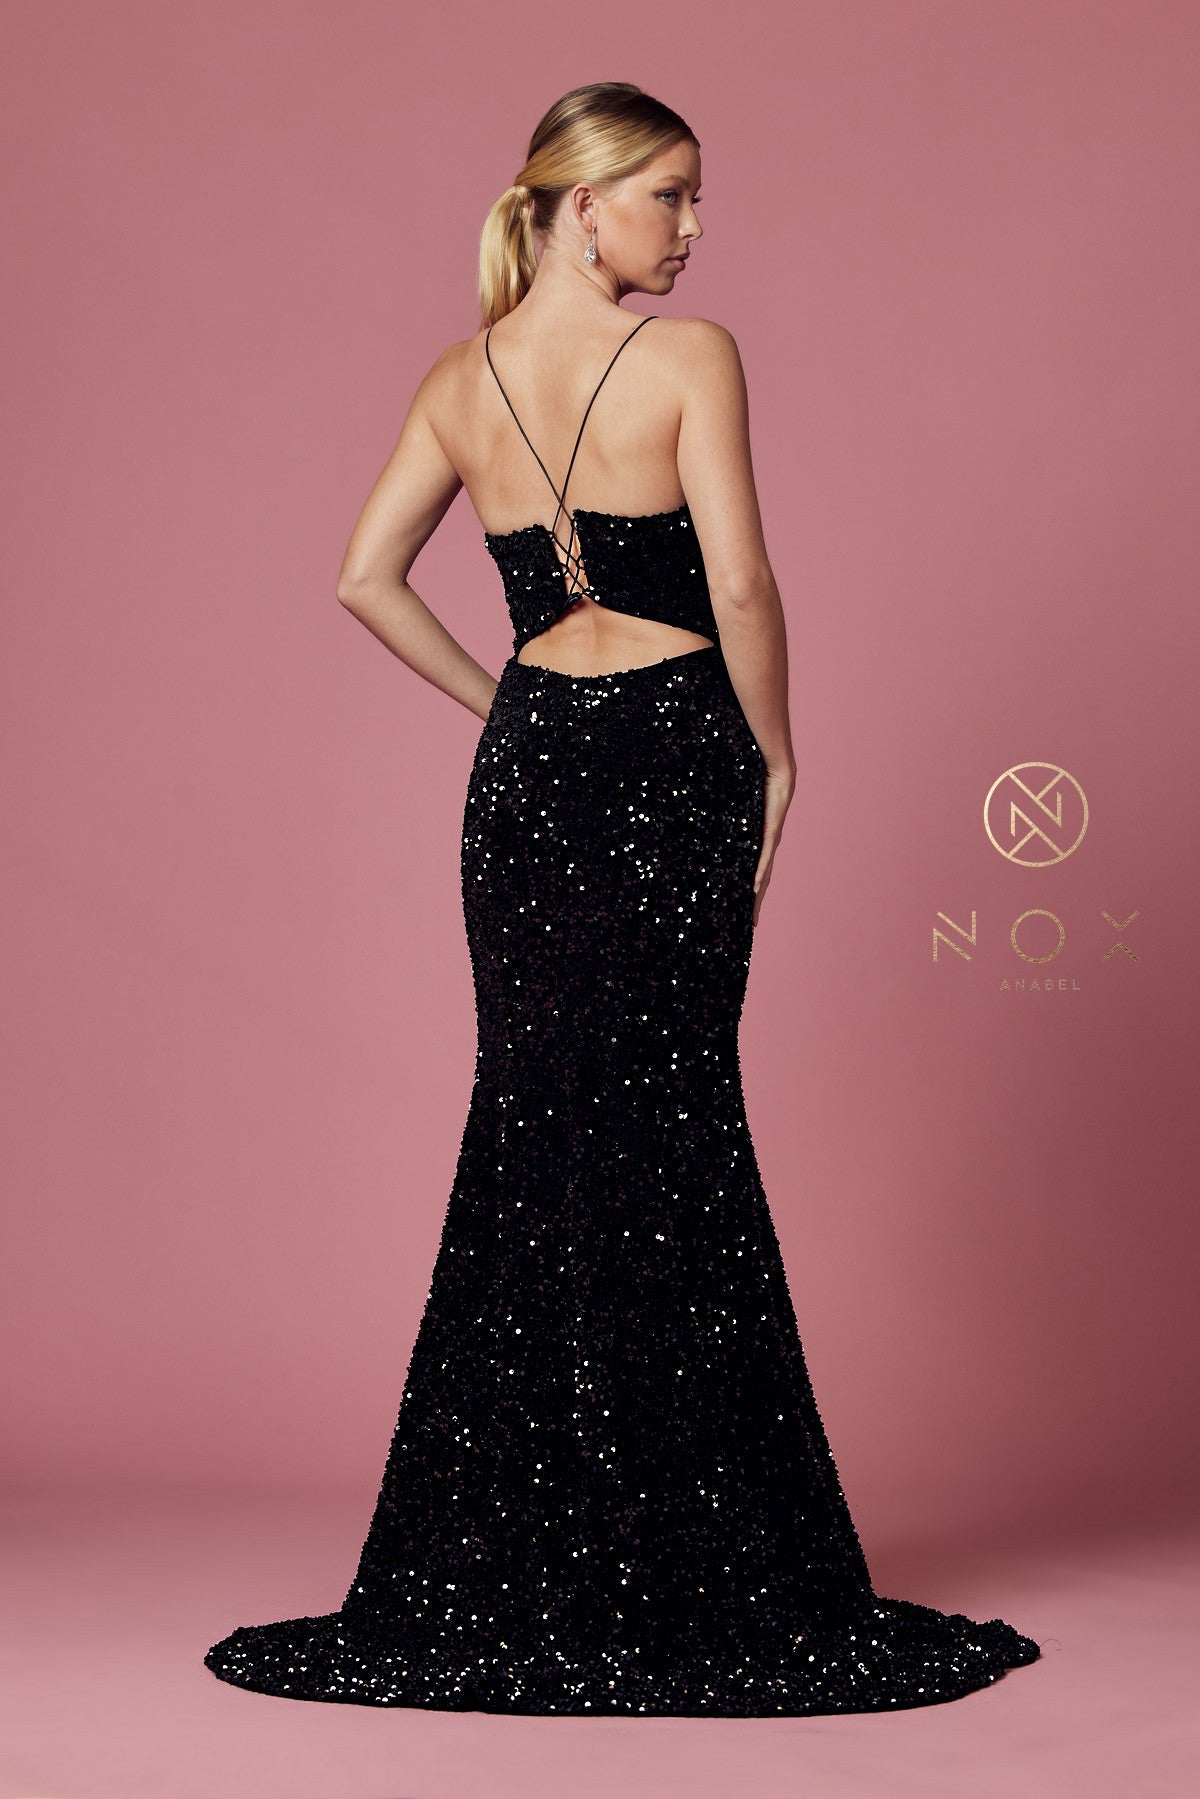 Nox Anabel R433 Long Fitted Velvet Sequin Prom Dress Formal Slit V Neck Corset  PLUNGING NECKLINE FITTED BODICE VELVET SEQUENCE TRUMPET SKIRT An absolutely glamorous piece by NOX ANABEL is for a classy lady who is all about the details. This relaxed fit-and-flare silhouette features a soft sweetheart plunge neckline and spaghetti straps for an elegant and universally flattering shape—Shinny silhouette with sequins incorporated throughout the sheer bodice for a hint of shimmer.